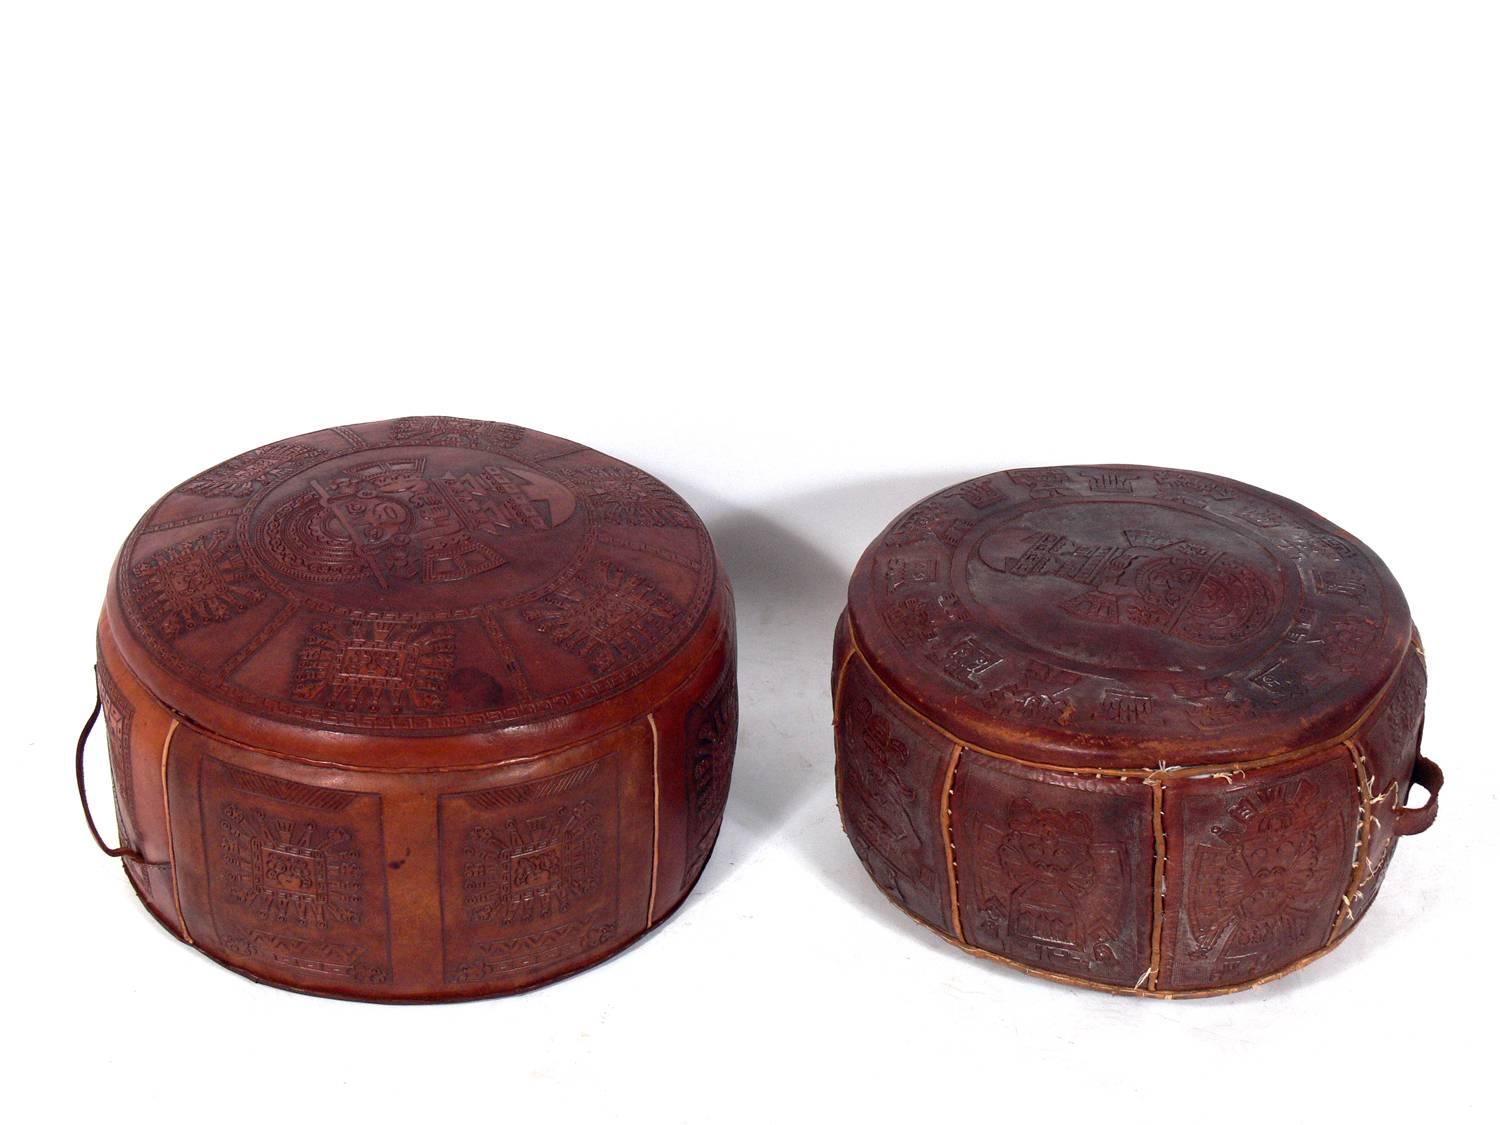 Mexican Tribal decoration leather stools, probably, circa 1950s. They are a versatile size and can be used as stools, ottomans, or poufs, or with the addition of a tray or top, could also be used as coffee tables. They retain their warm original